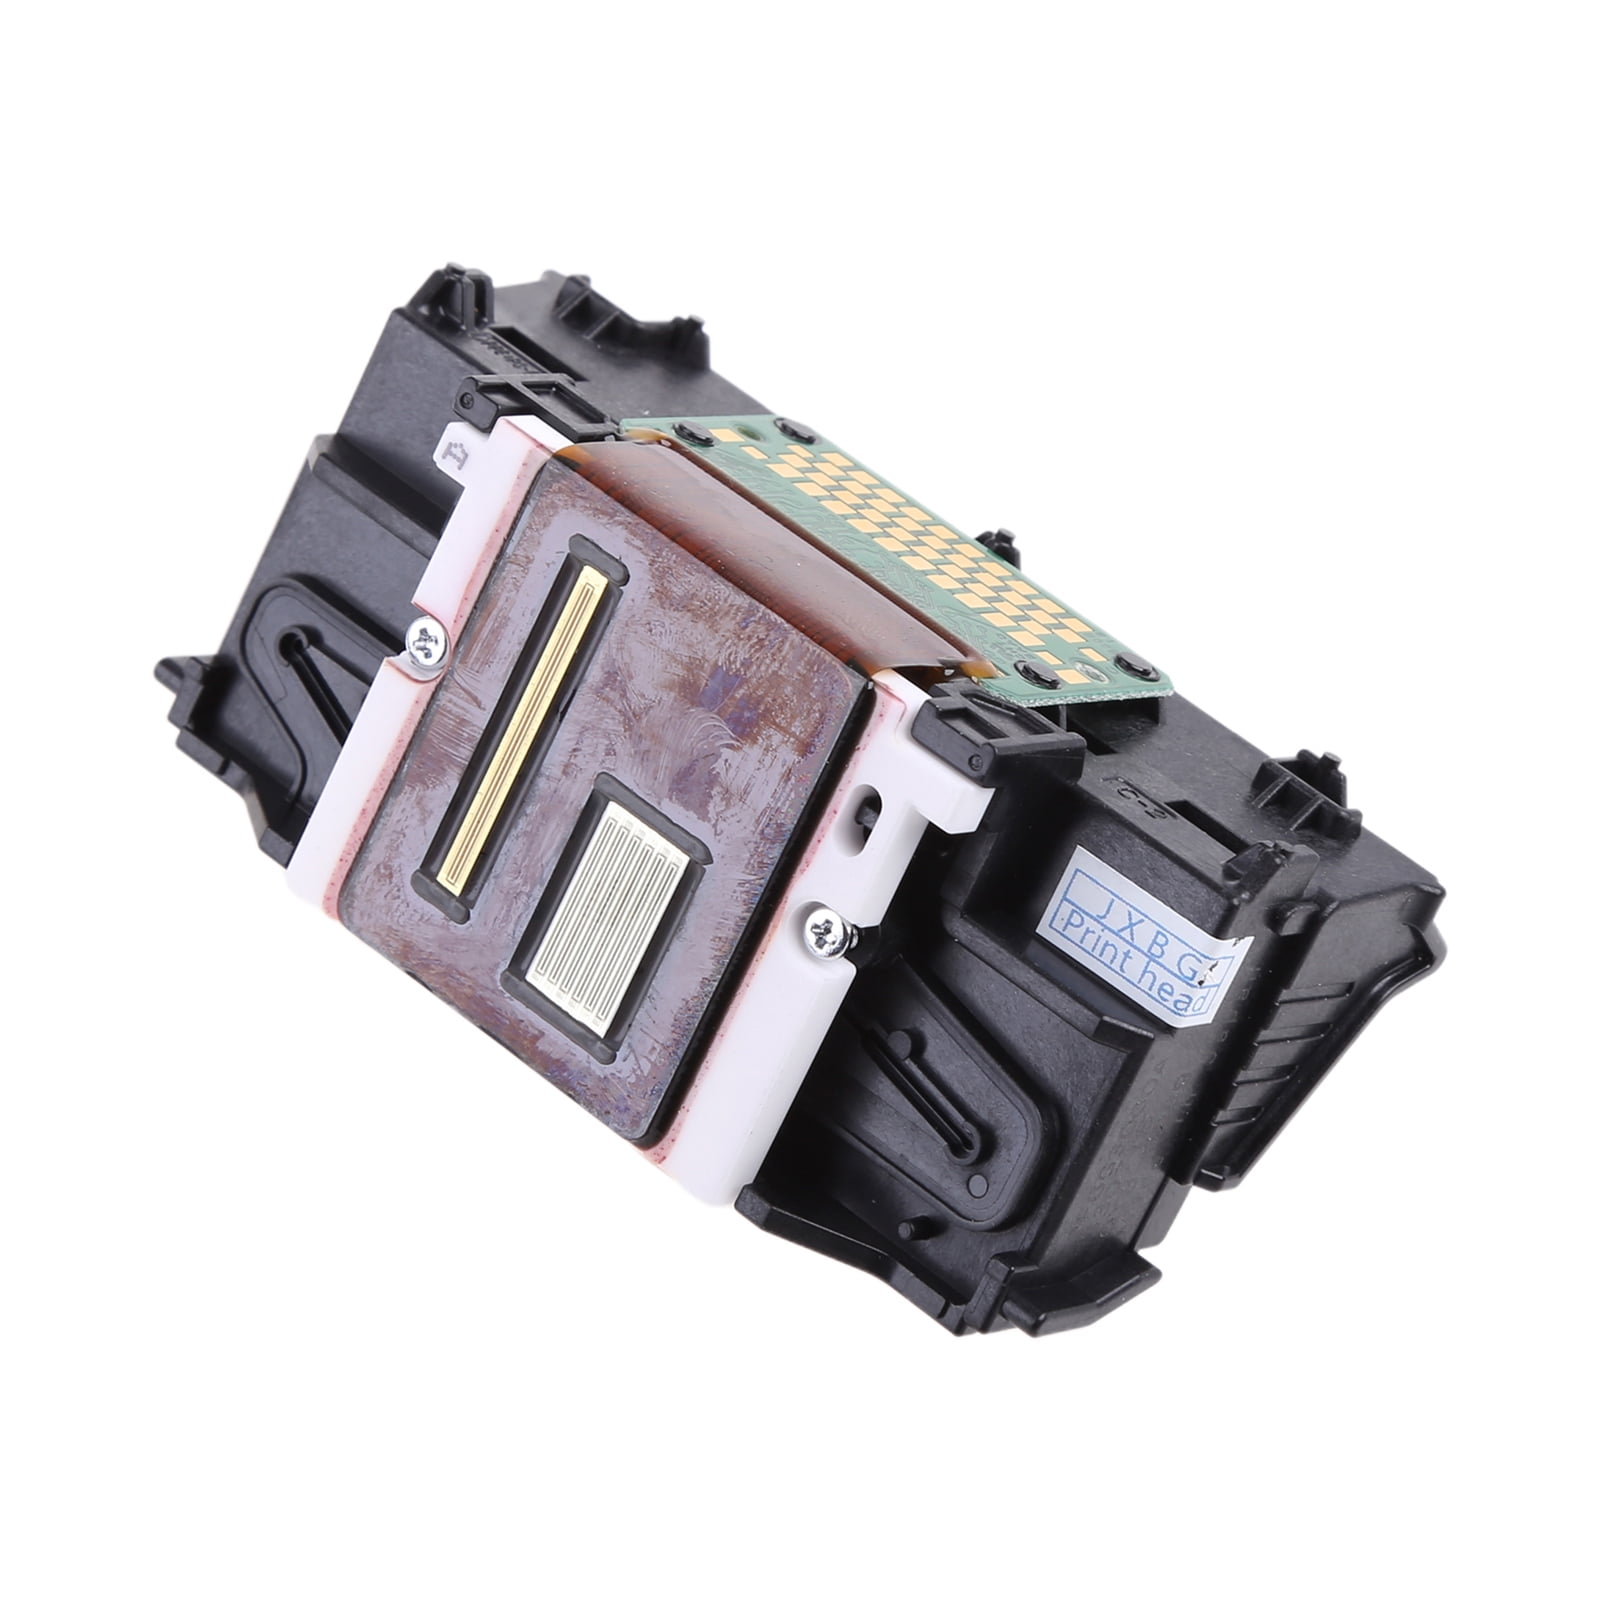 ASHATA Replacement QY6-0089 Printhead Print Head for Canon TS5080 TS6020  TS6050 TS6051 TS6052 TS6080 TS5050 TS5051 TS5053 TS5055 TS5070 - Single  Black